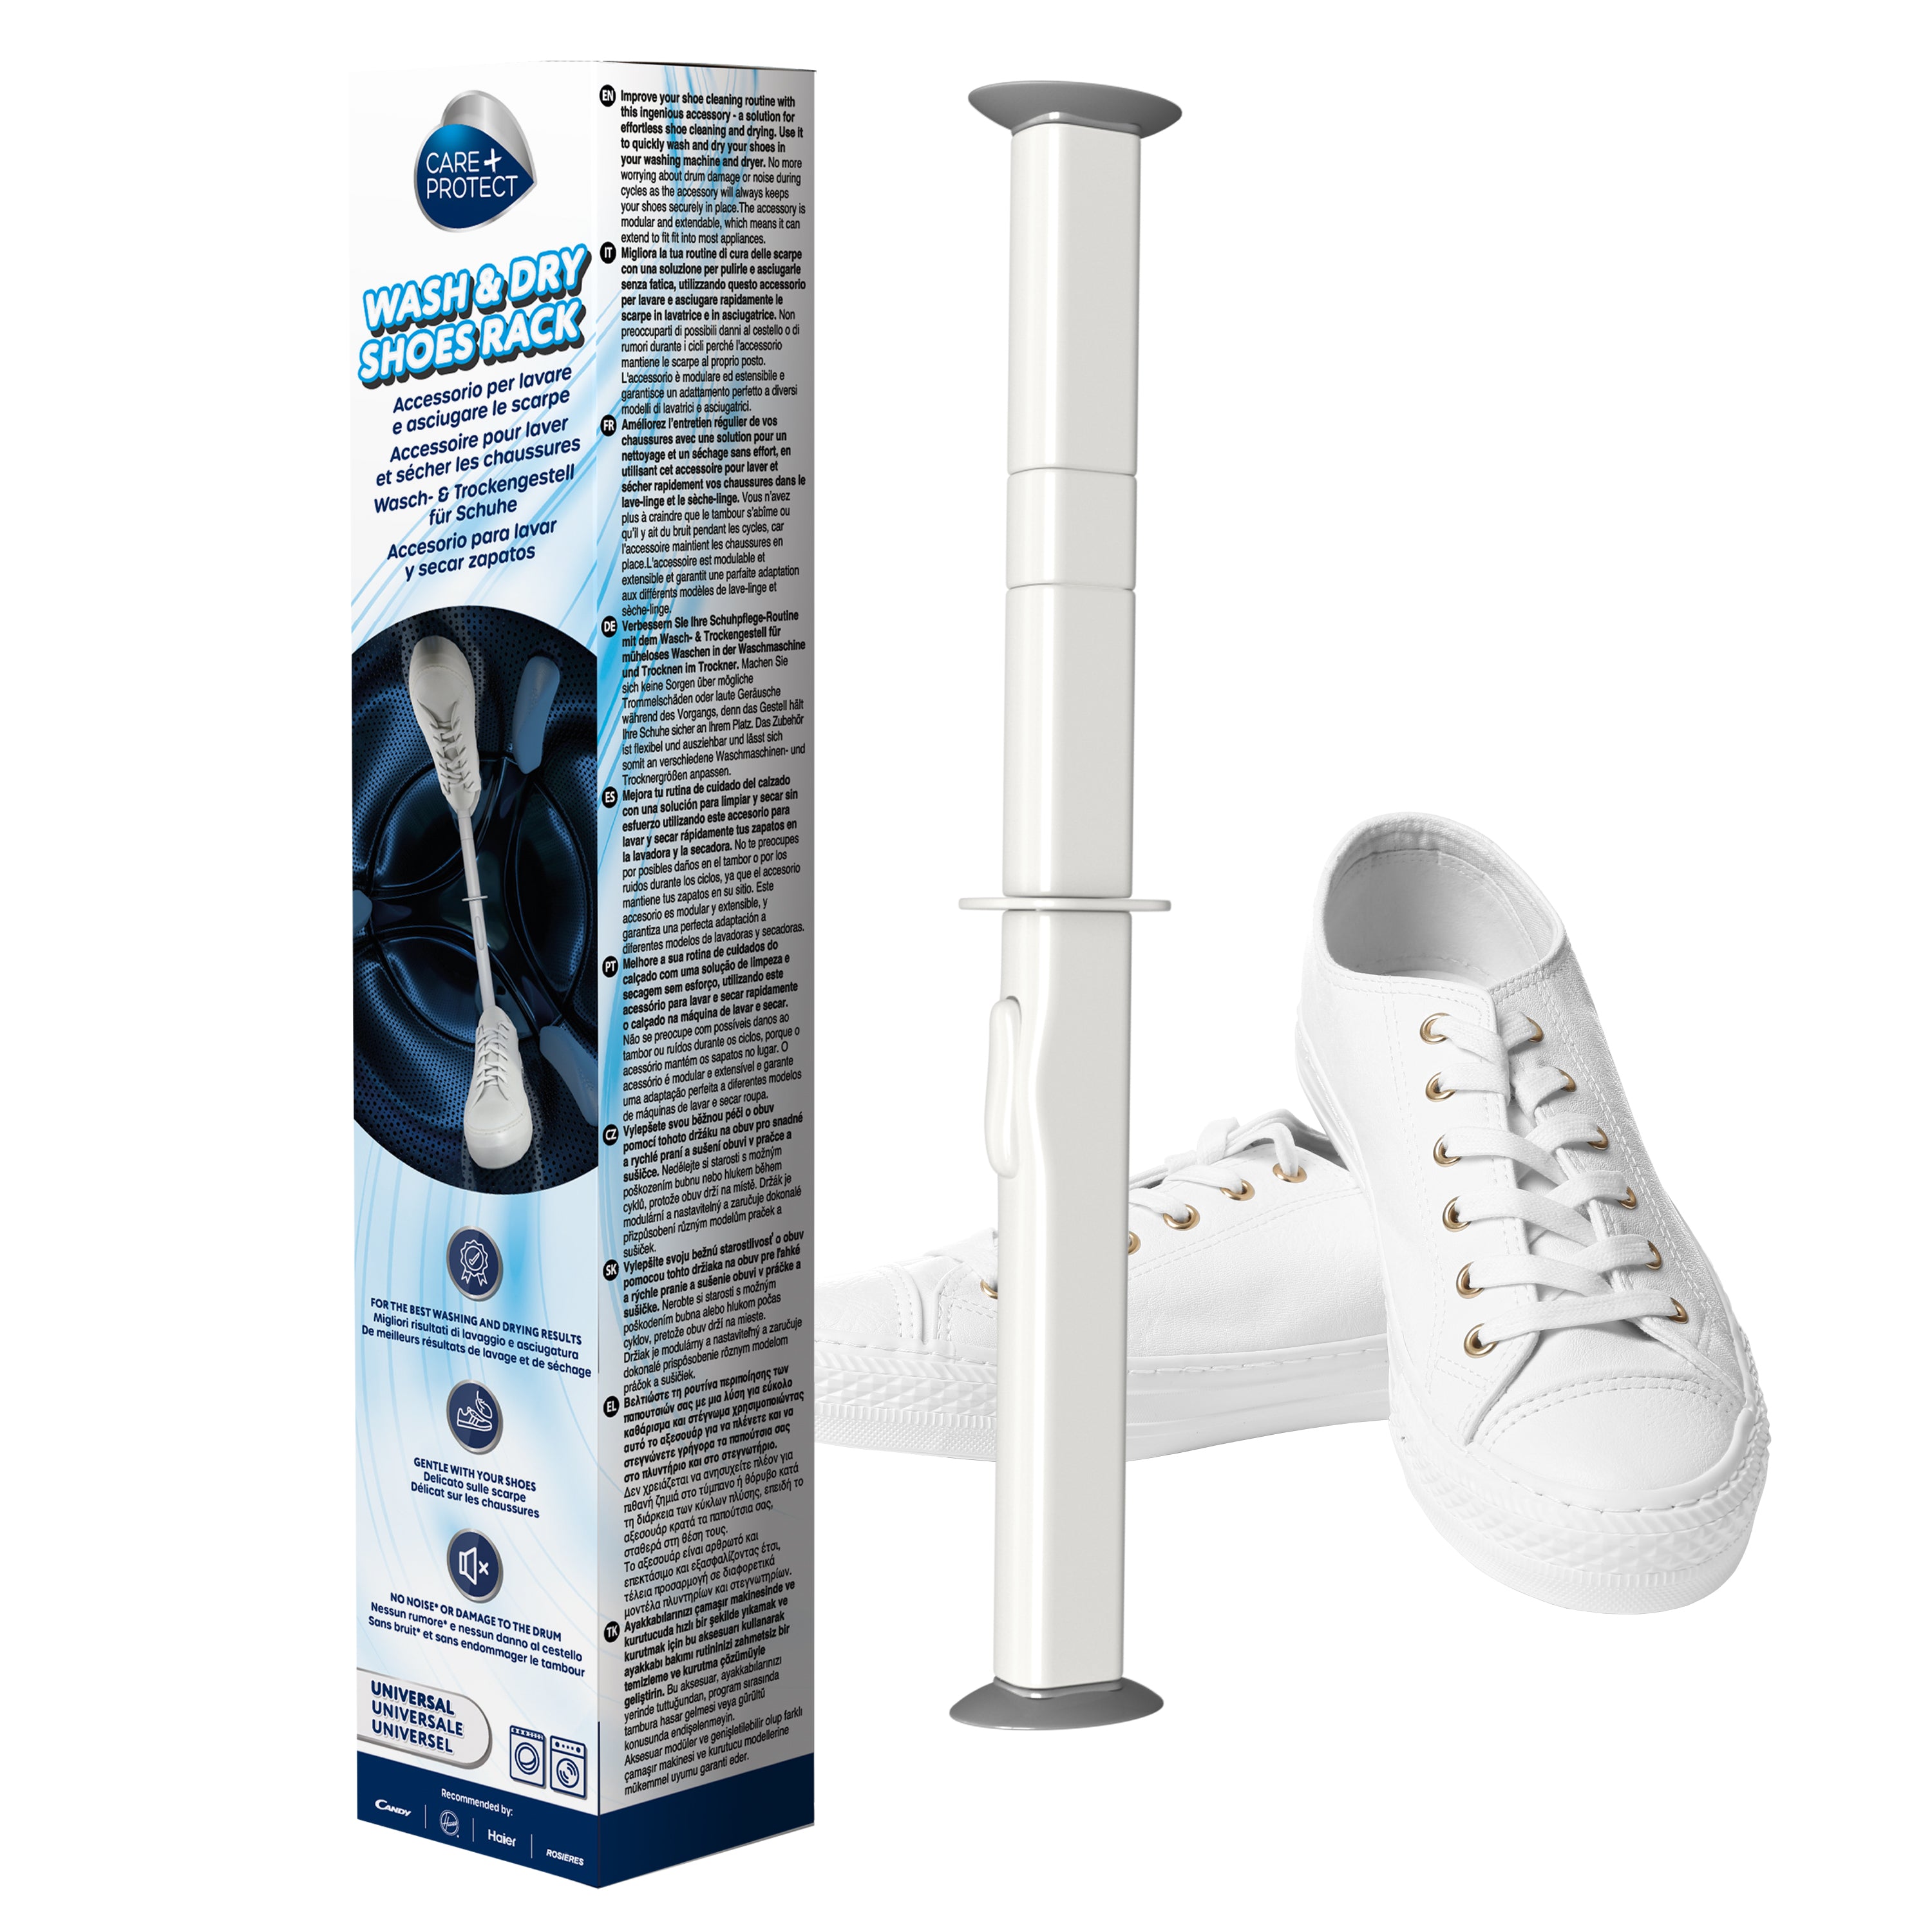 CARE + PROTECT Universal Shoes/Trainers Washing/Drying Rack